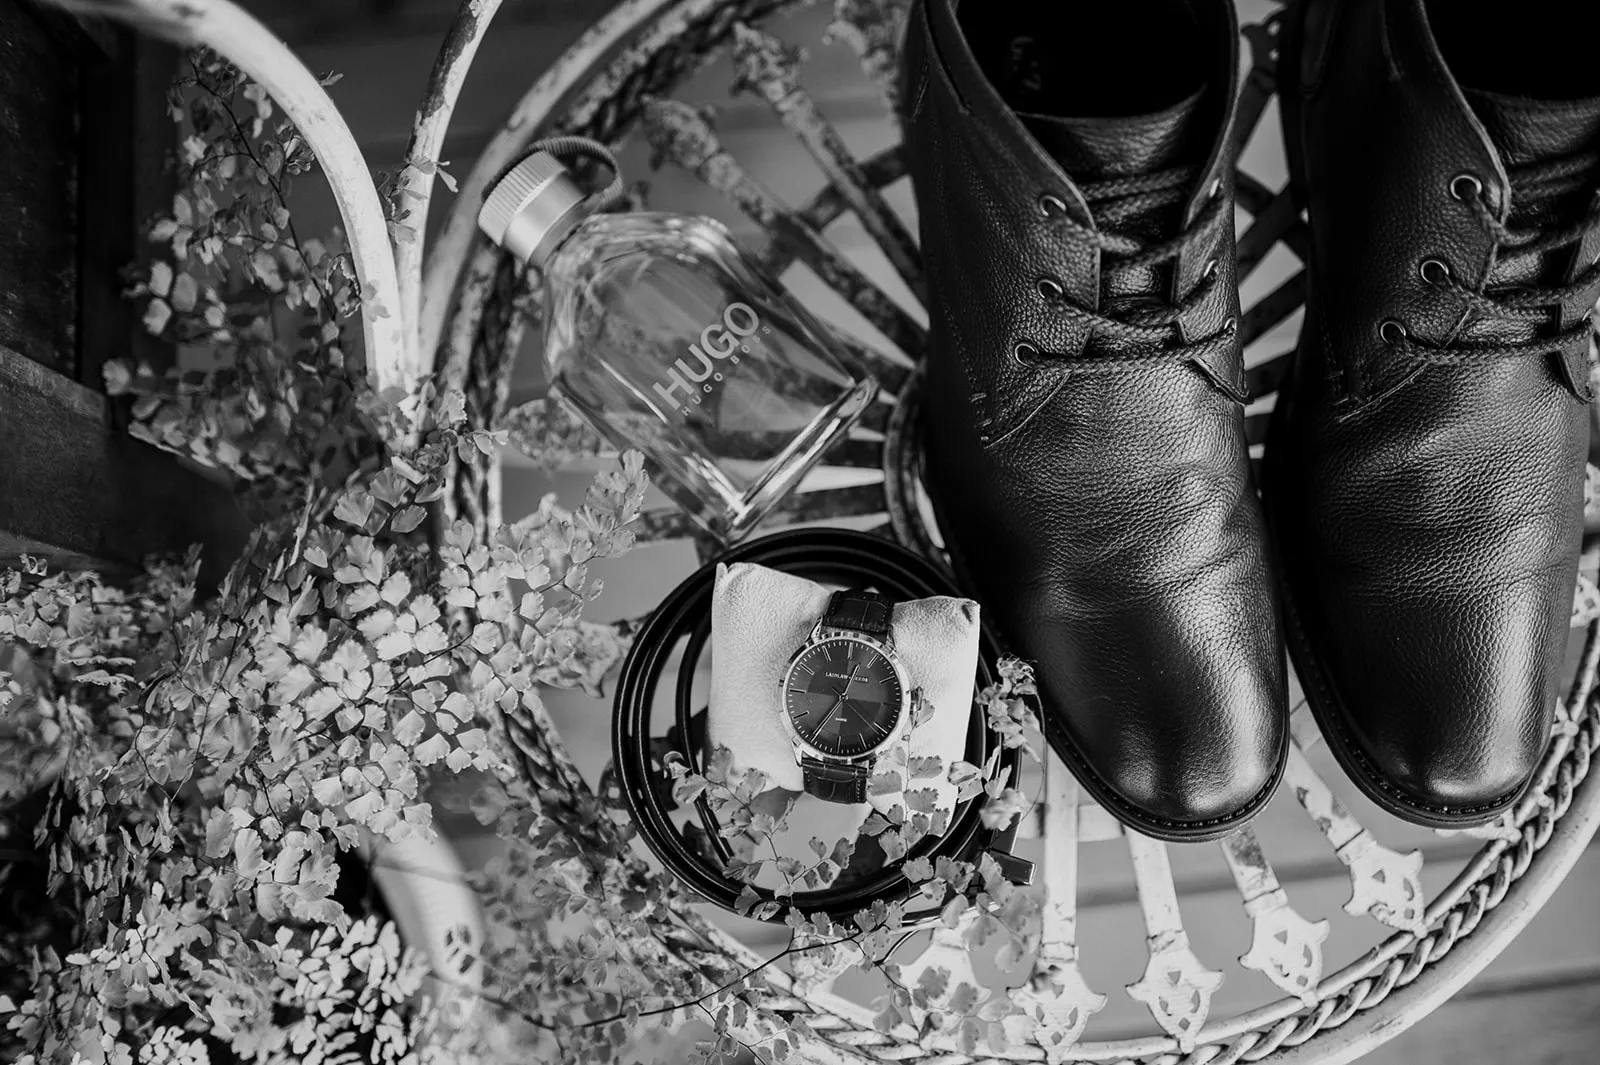 Black and white image of leather boots, a wristwatch on a cushion, a perfume bottle labeled "Hugo," and green foliage arranged on a perforated metal chair.